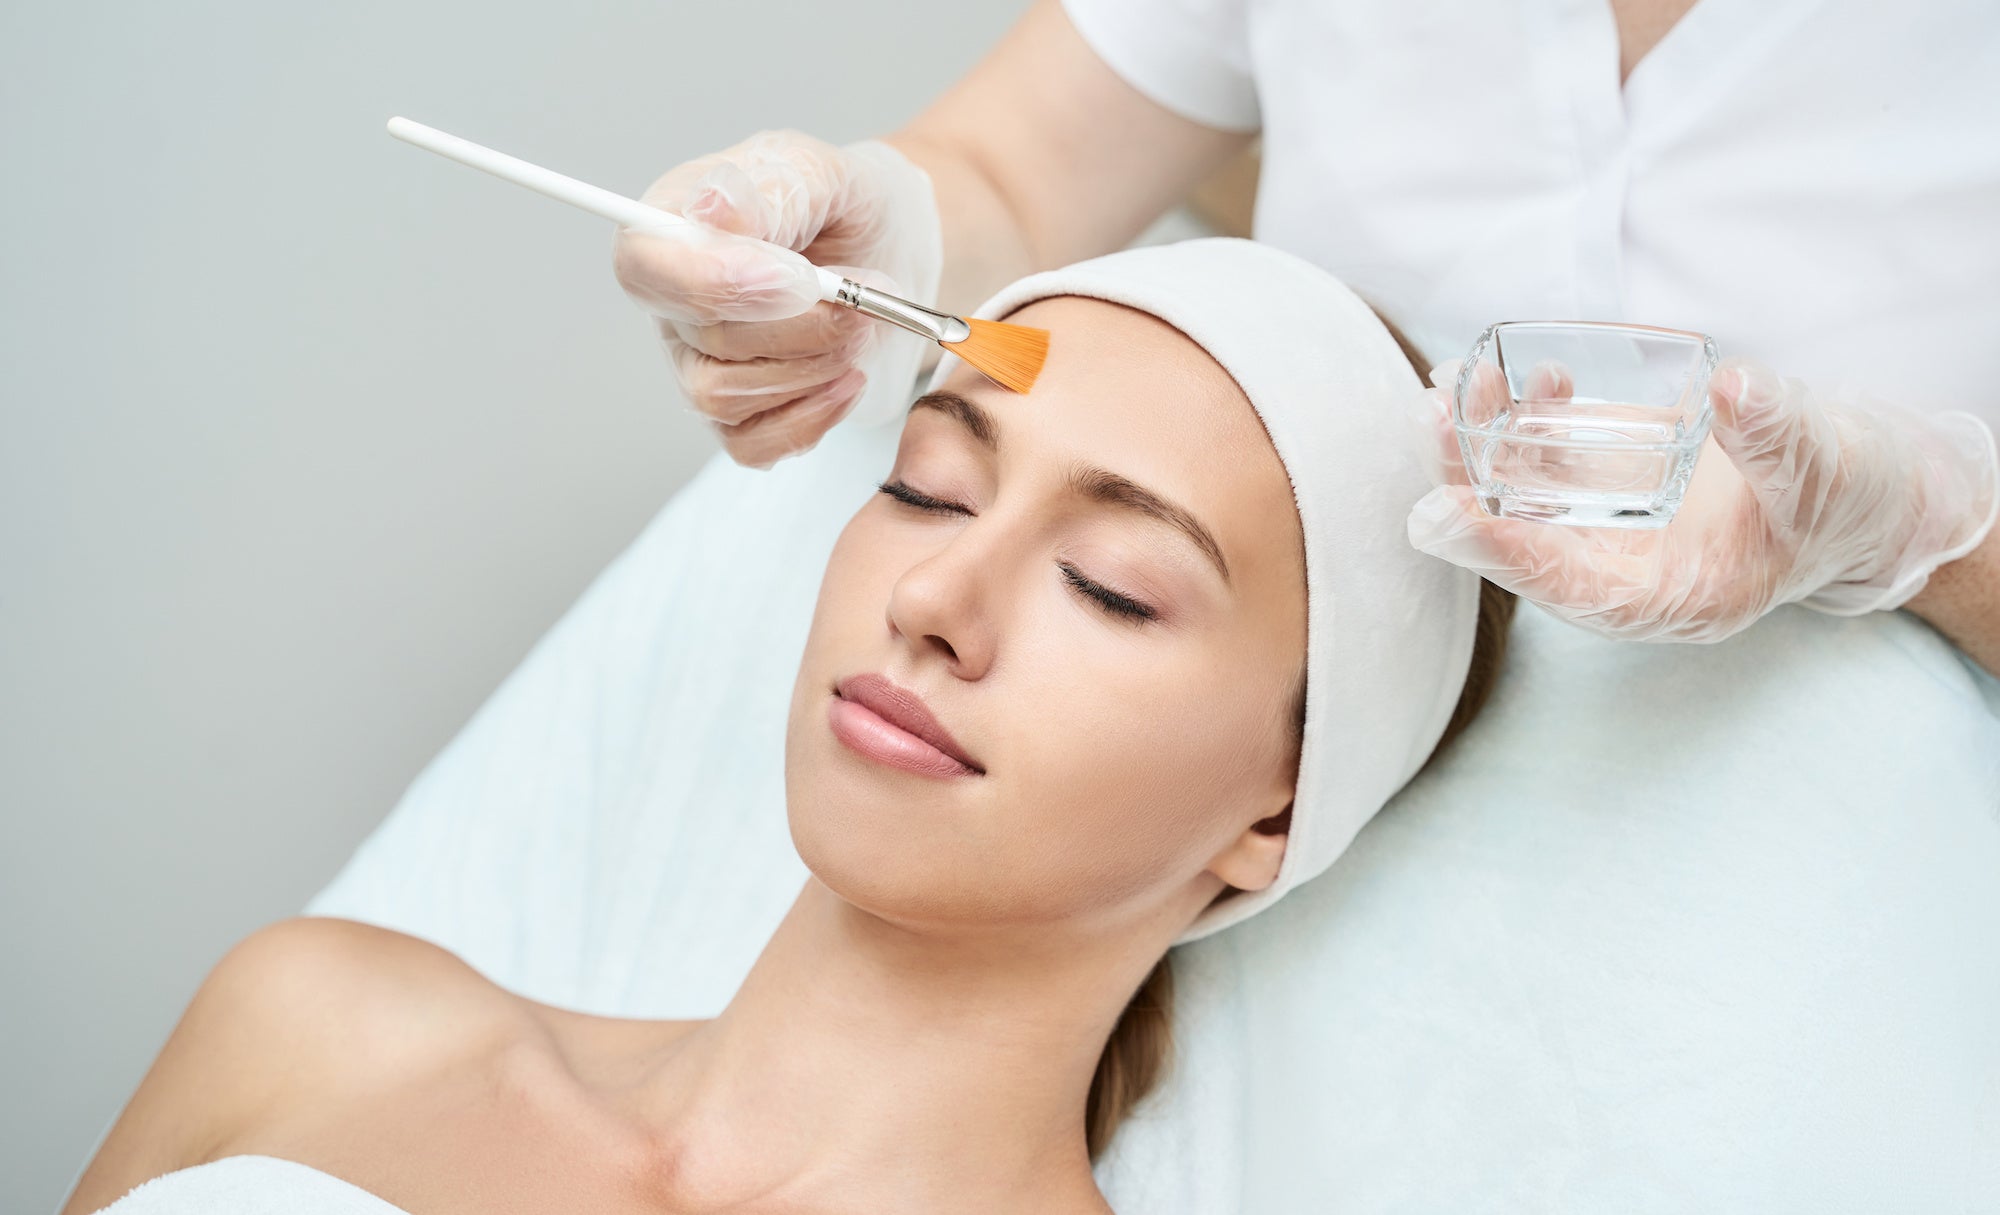 The 4 Best Ways to Care for Your Skin After a Chemical Peel